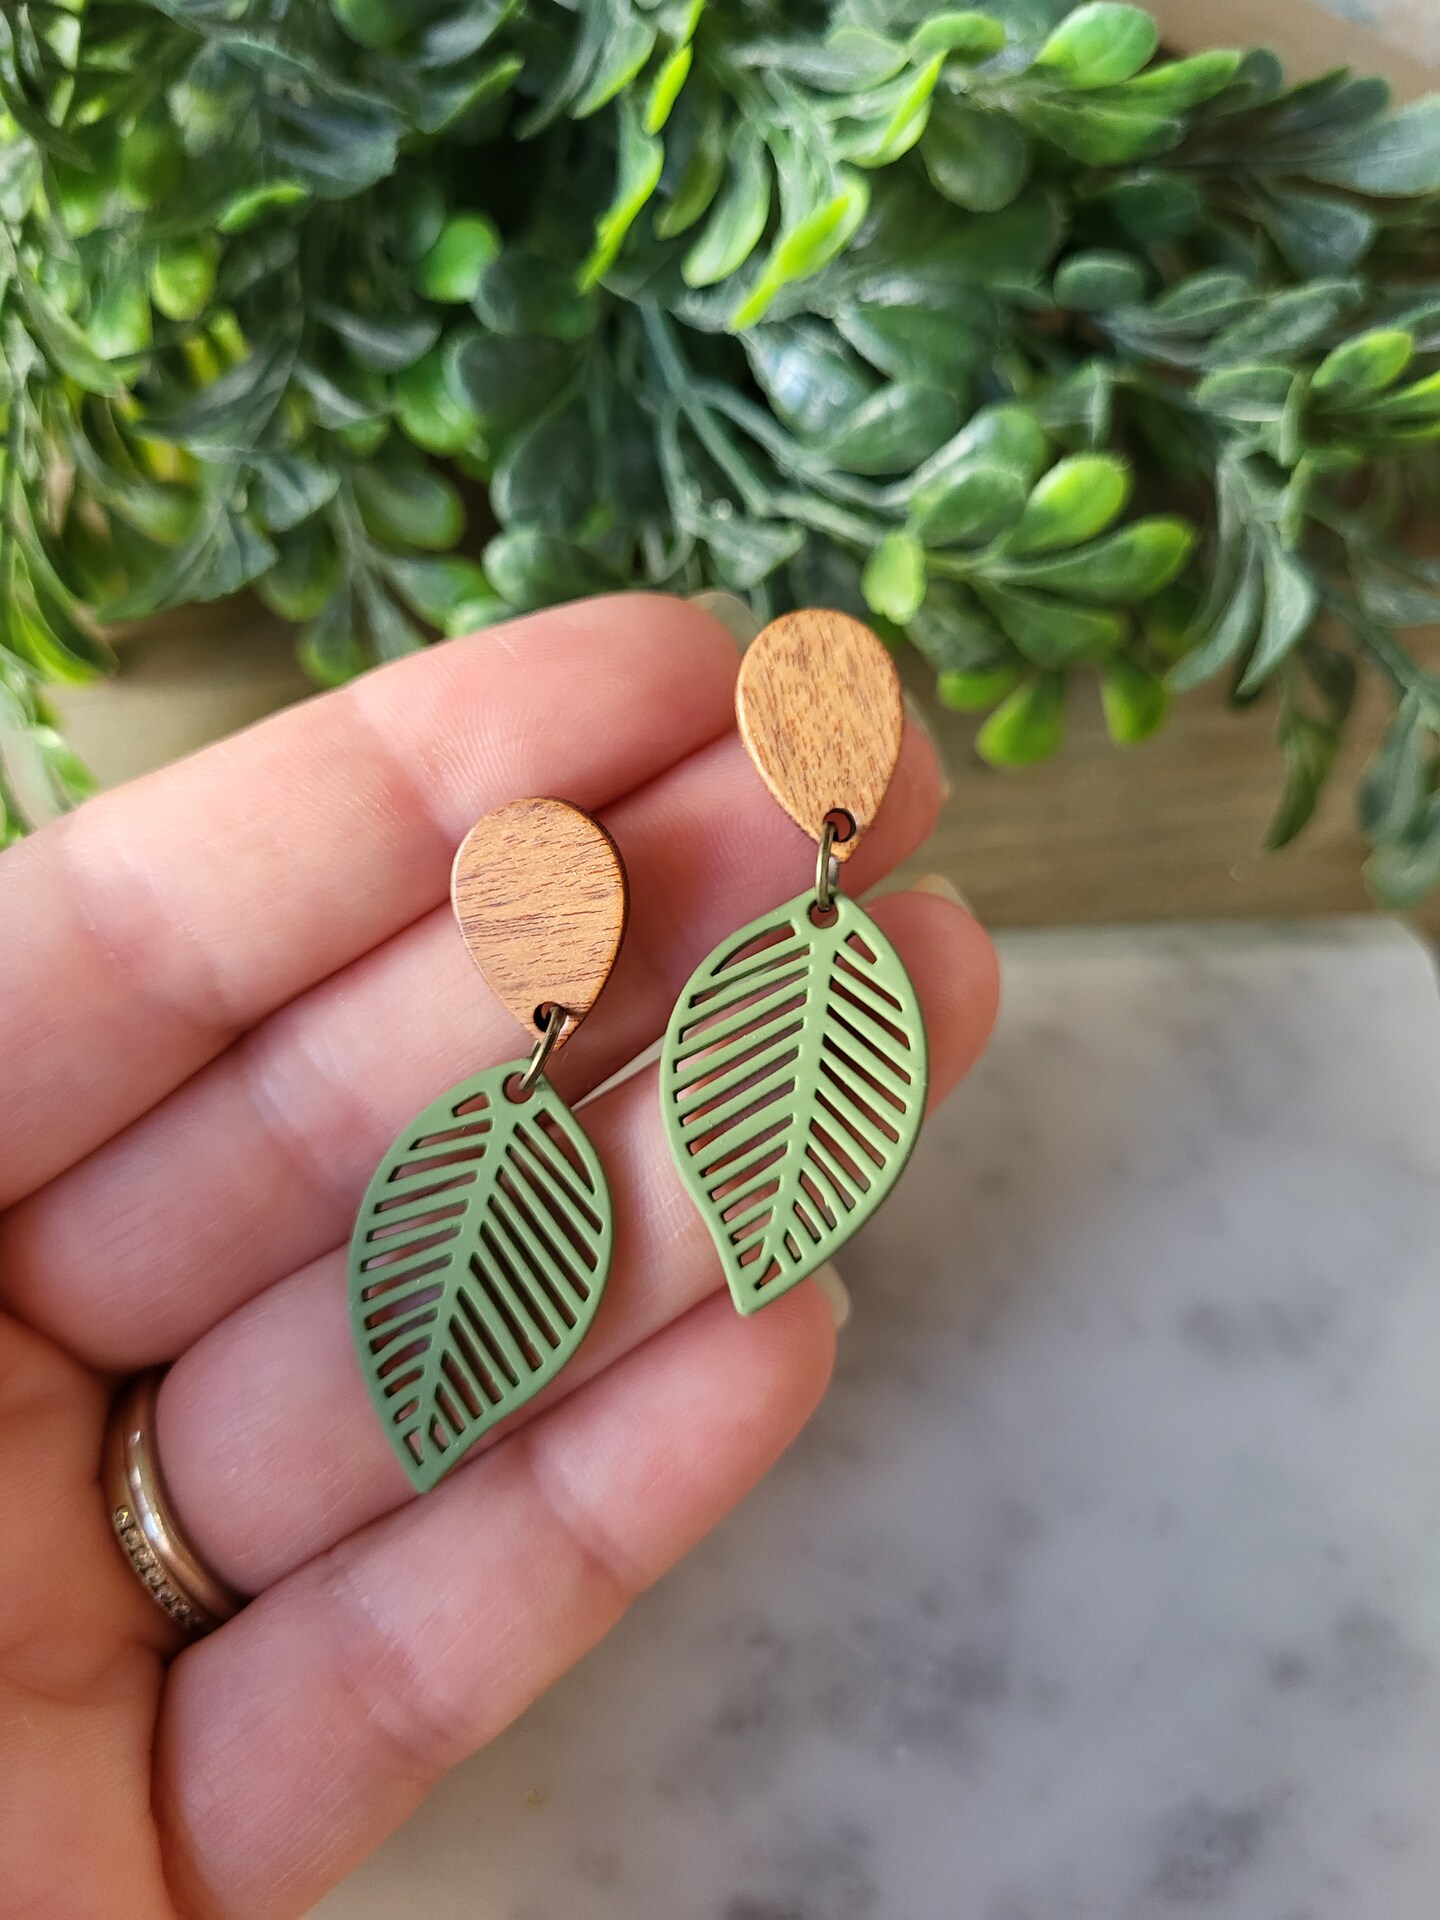 Wooden Leaf Earrings with Stainless Steel Fish Hooks Laser Cut Wood Drop Dangle Earrings for The Nature Lover in Caribbean Mist Gold Hardware